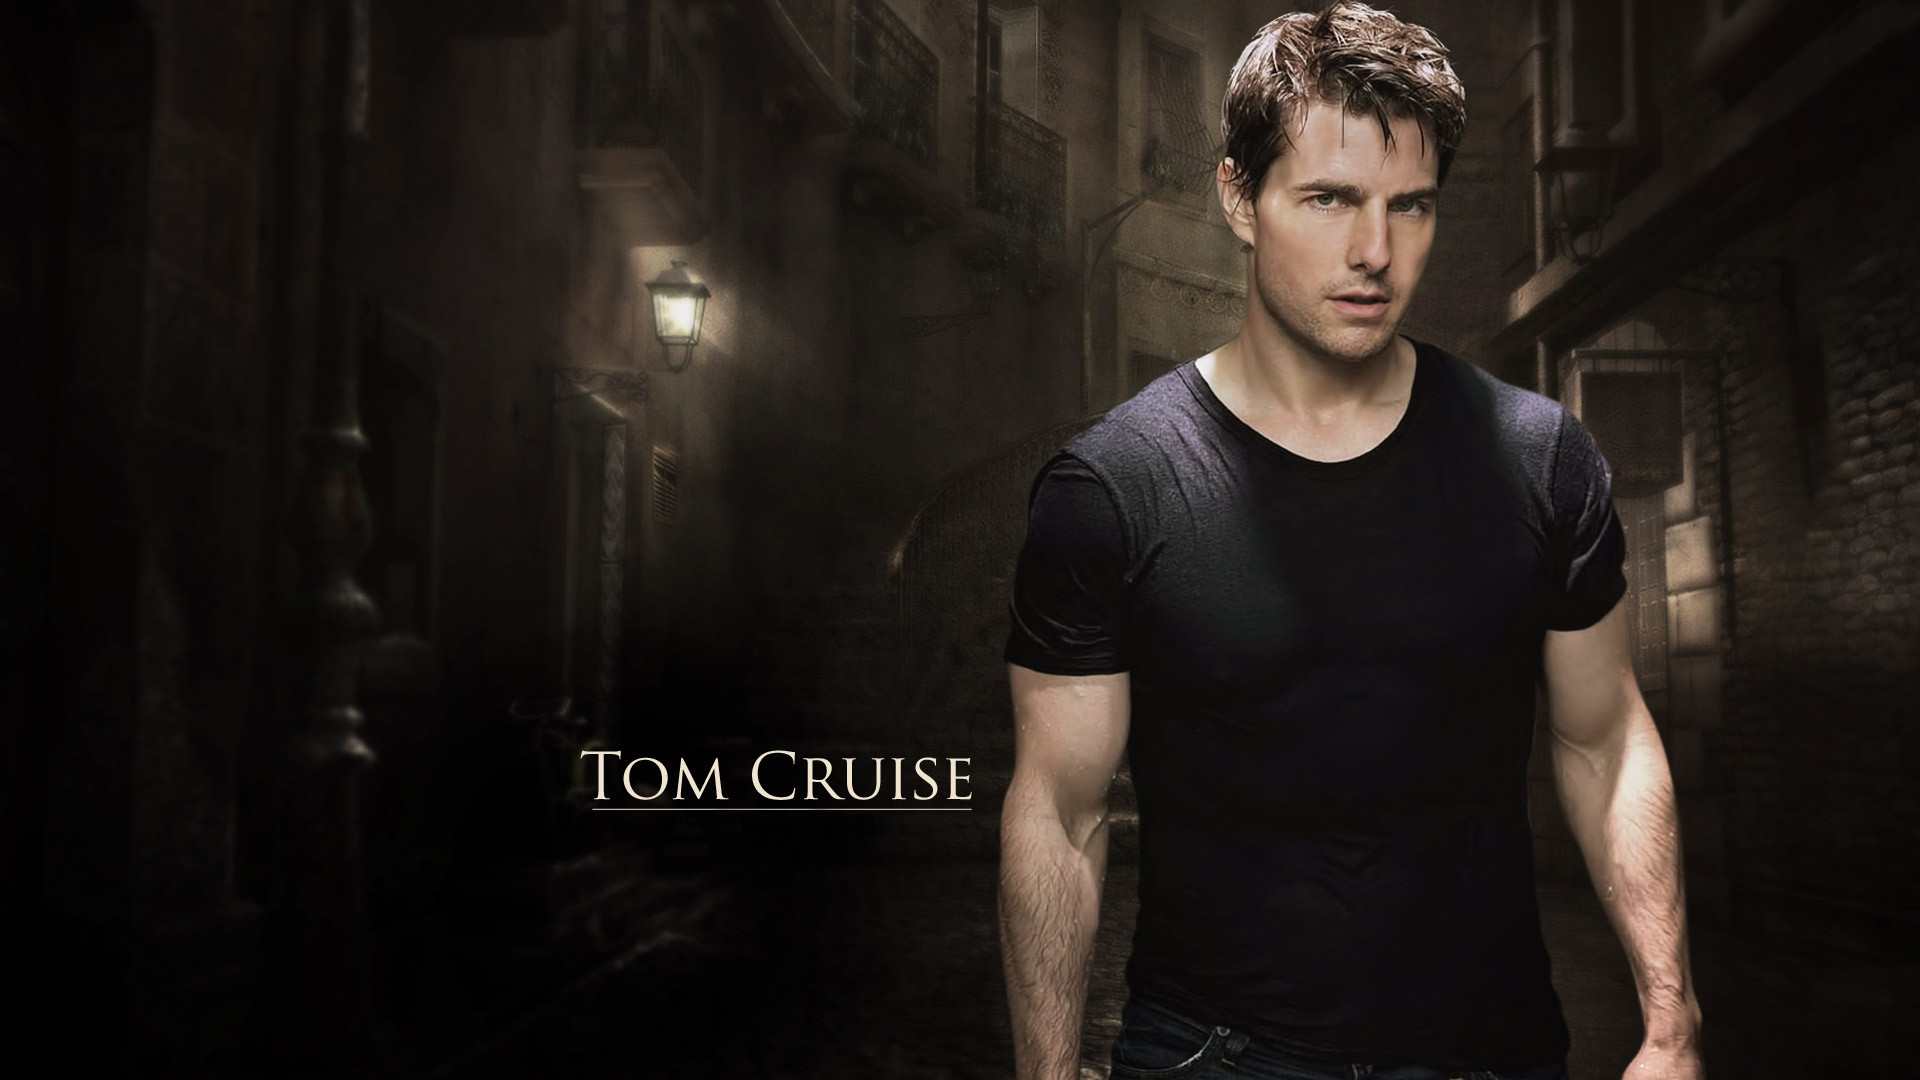 Free download Mission Impossible Wallpaper - [1920x1080] for your Desktop, Mobile & Tablet. Explore Tom Cruise Mission Impossible Wallpaper. Tom Cruise Mission Impossible Wallpaper, Mission: Impossible 6 Wallpaper, Tom Cruise Wallpaper